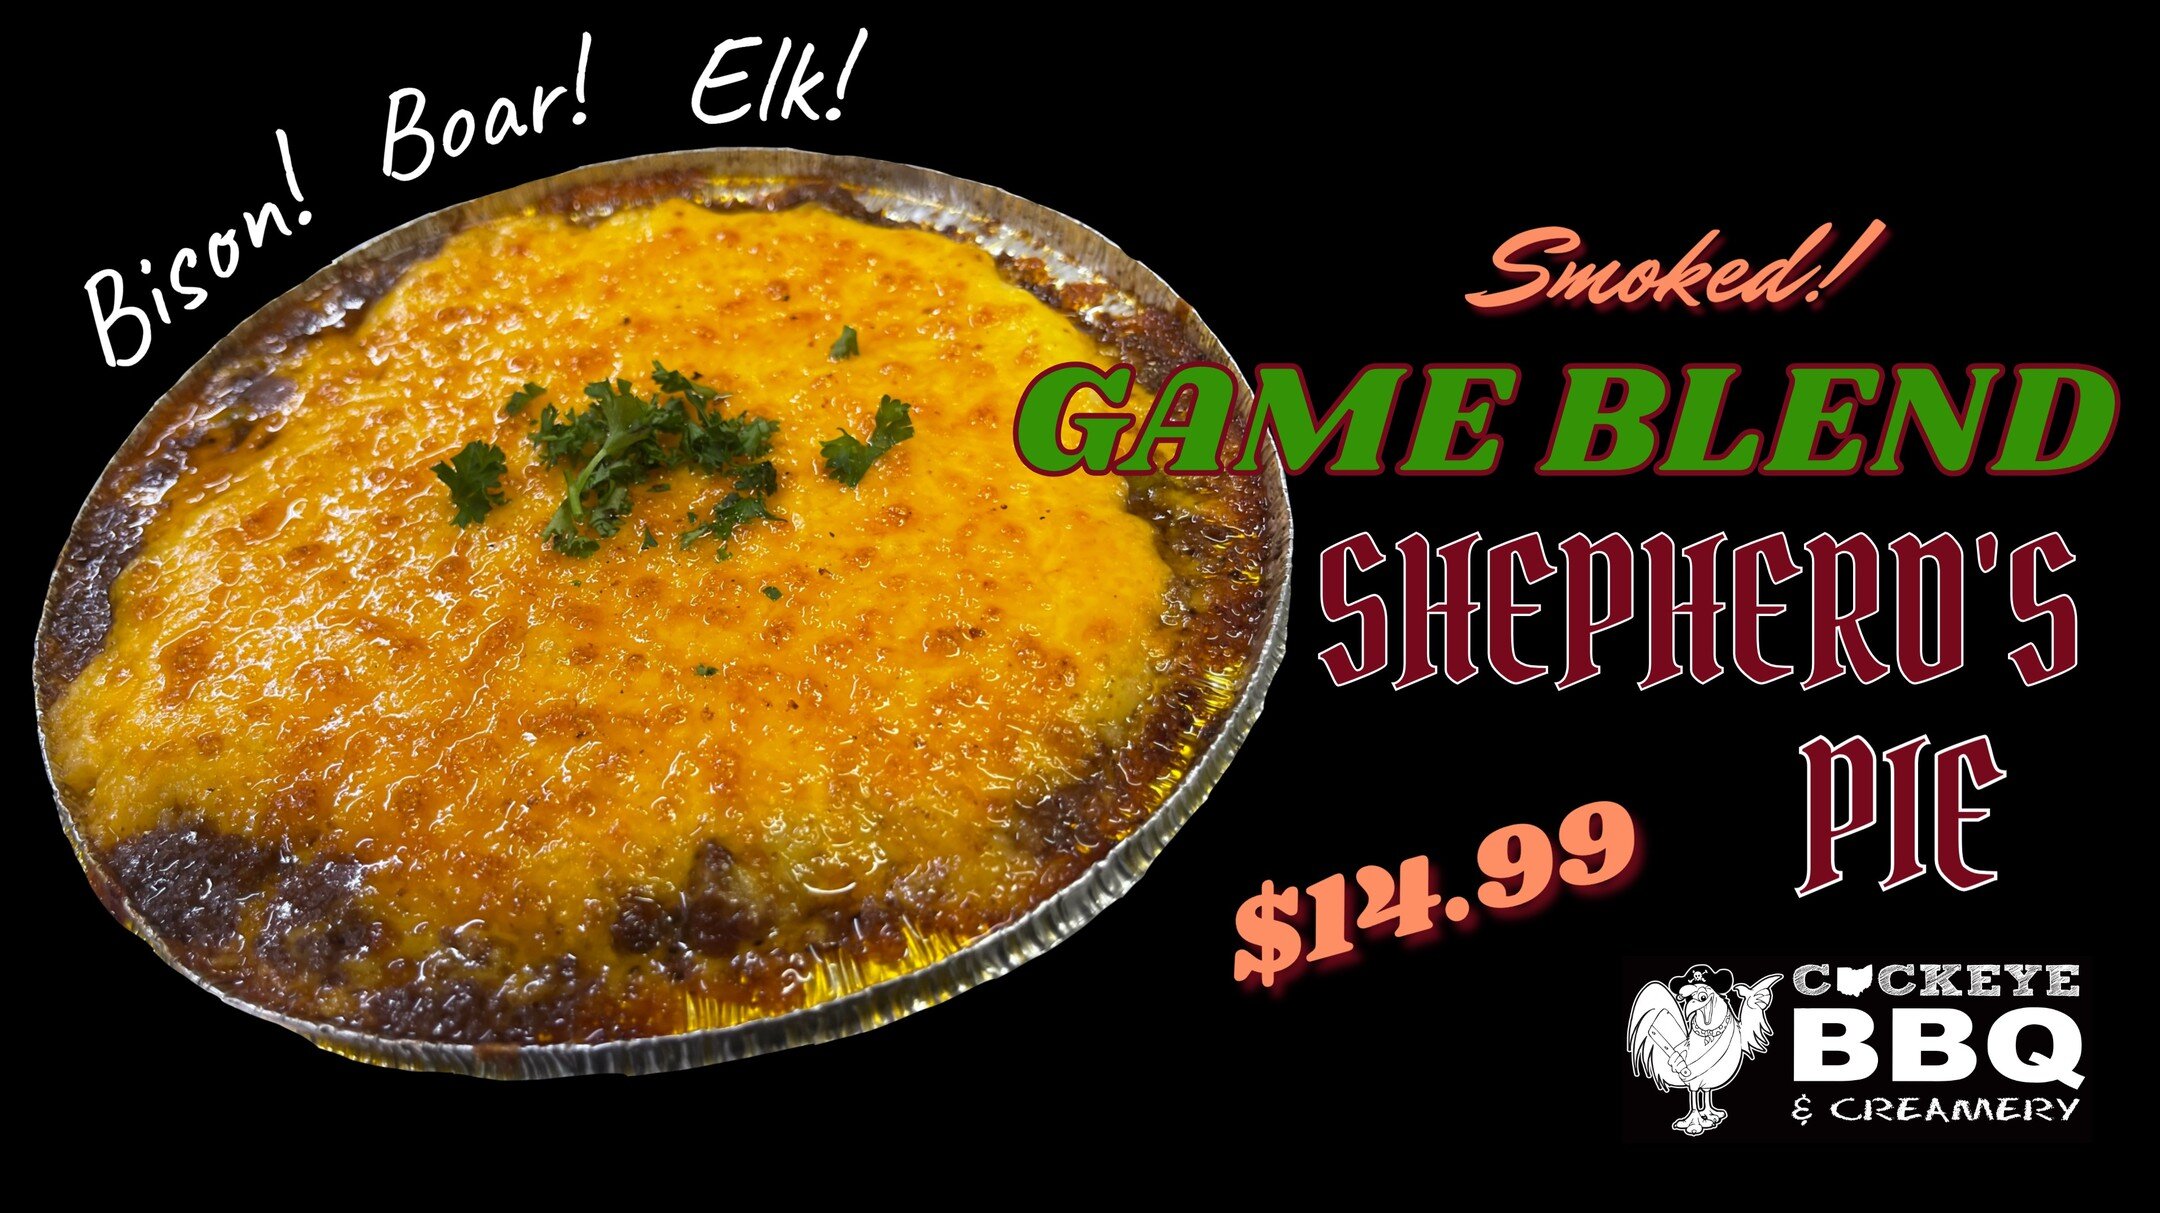 Dad Joke of the Day. What did the buffalo say to his kid when he sent him off to college? ...BI-SON!

We have a new #clotheslinespecial hitting the menu today for St. Patty's Day weekend. The GAME BLEND SHEPHERD'S PIE.

We start with smoked fresh-gro